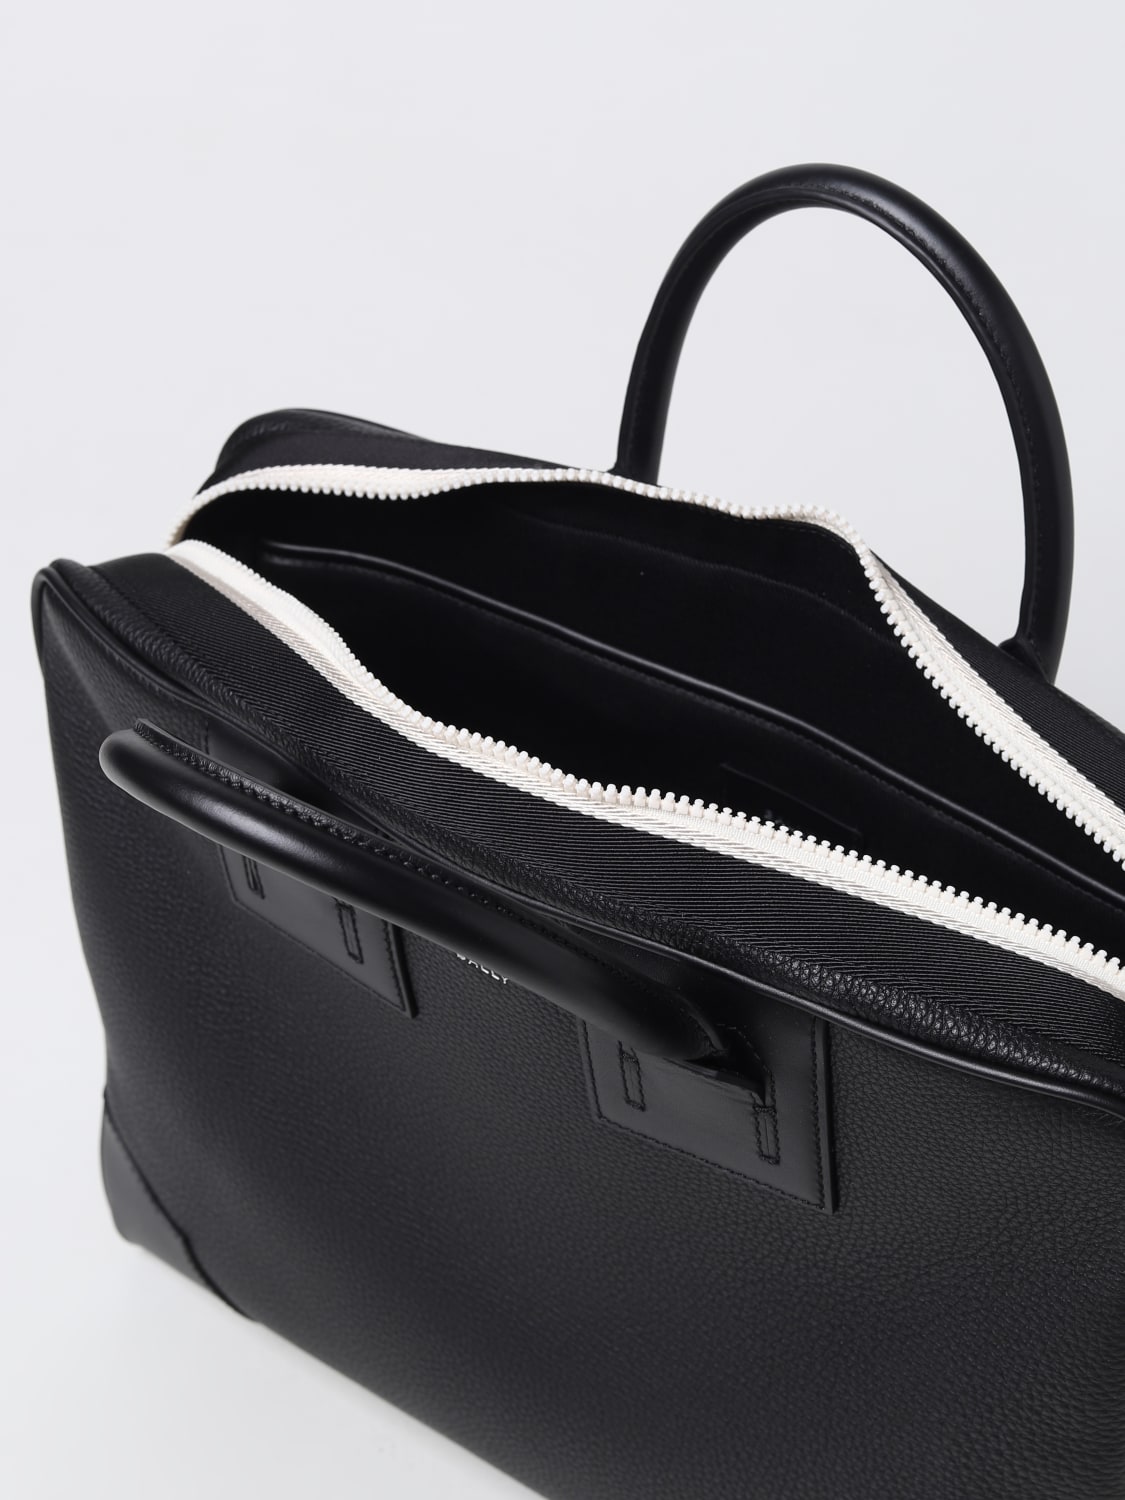 BALLY: bags for man - Black  Bally bags MAB00XVT397 online at